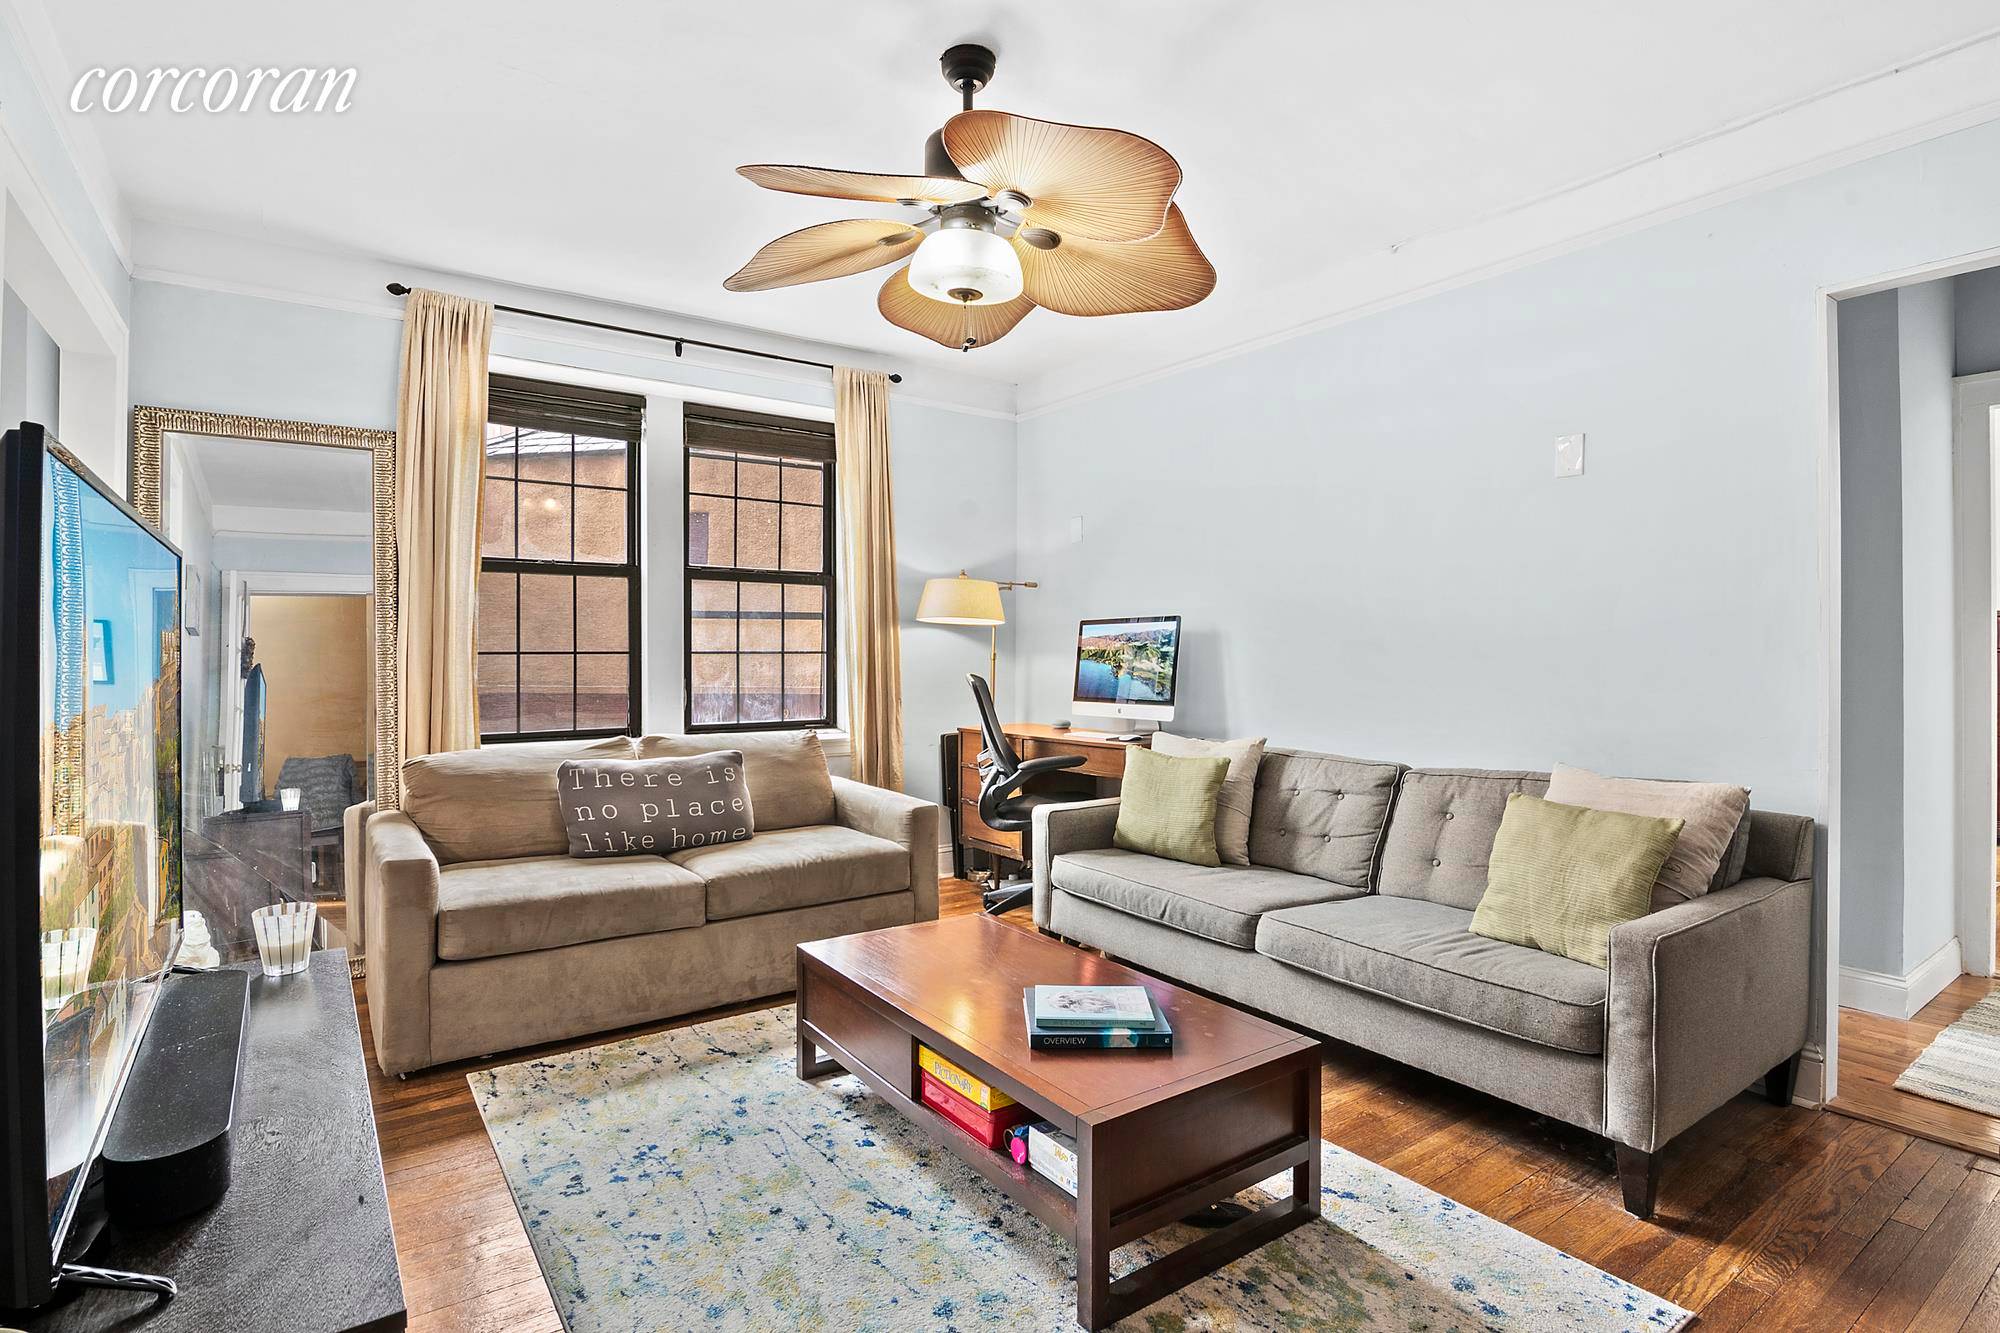 Southwestern sunlight streams into every room of this splendid one bedroom prewar apartment adjacent to historic Forest Hills Gardens.